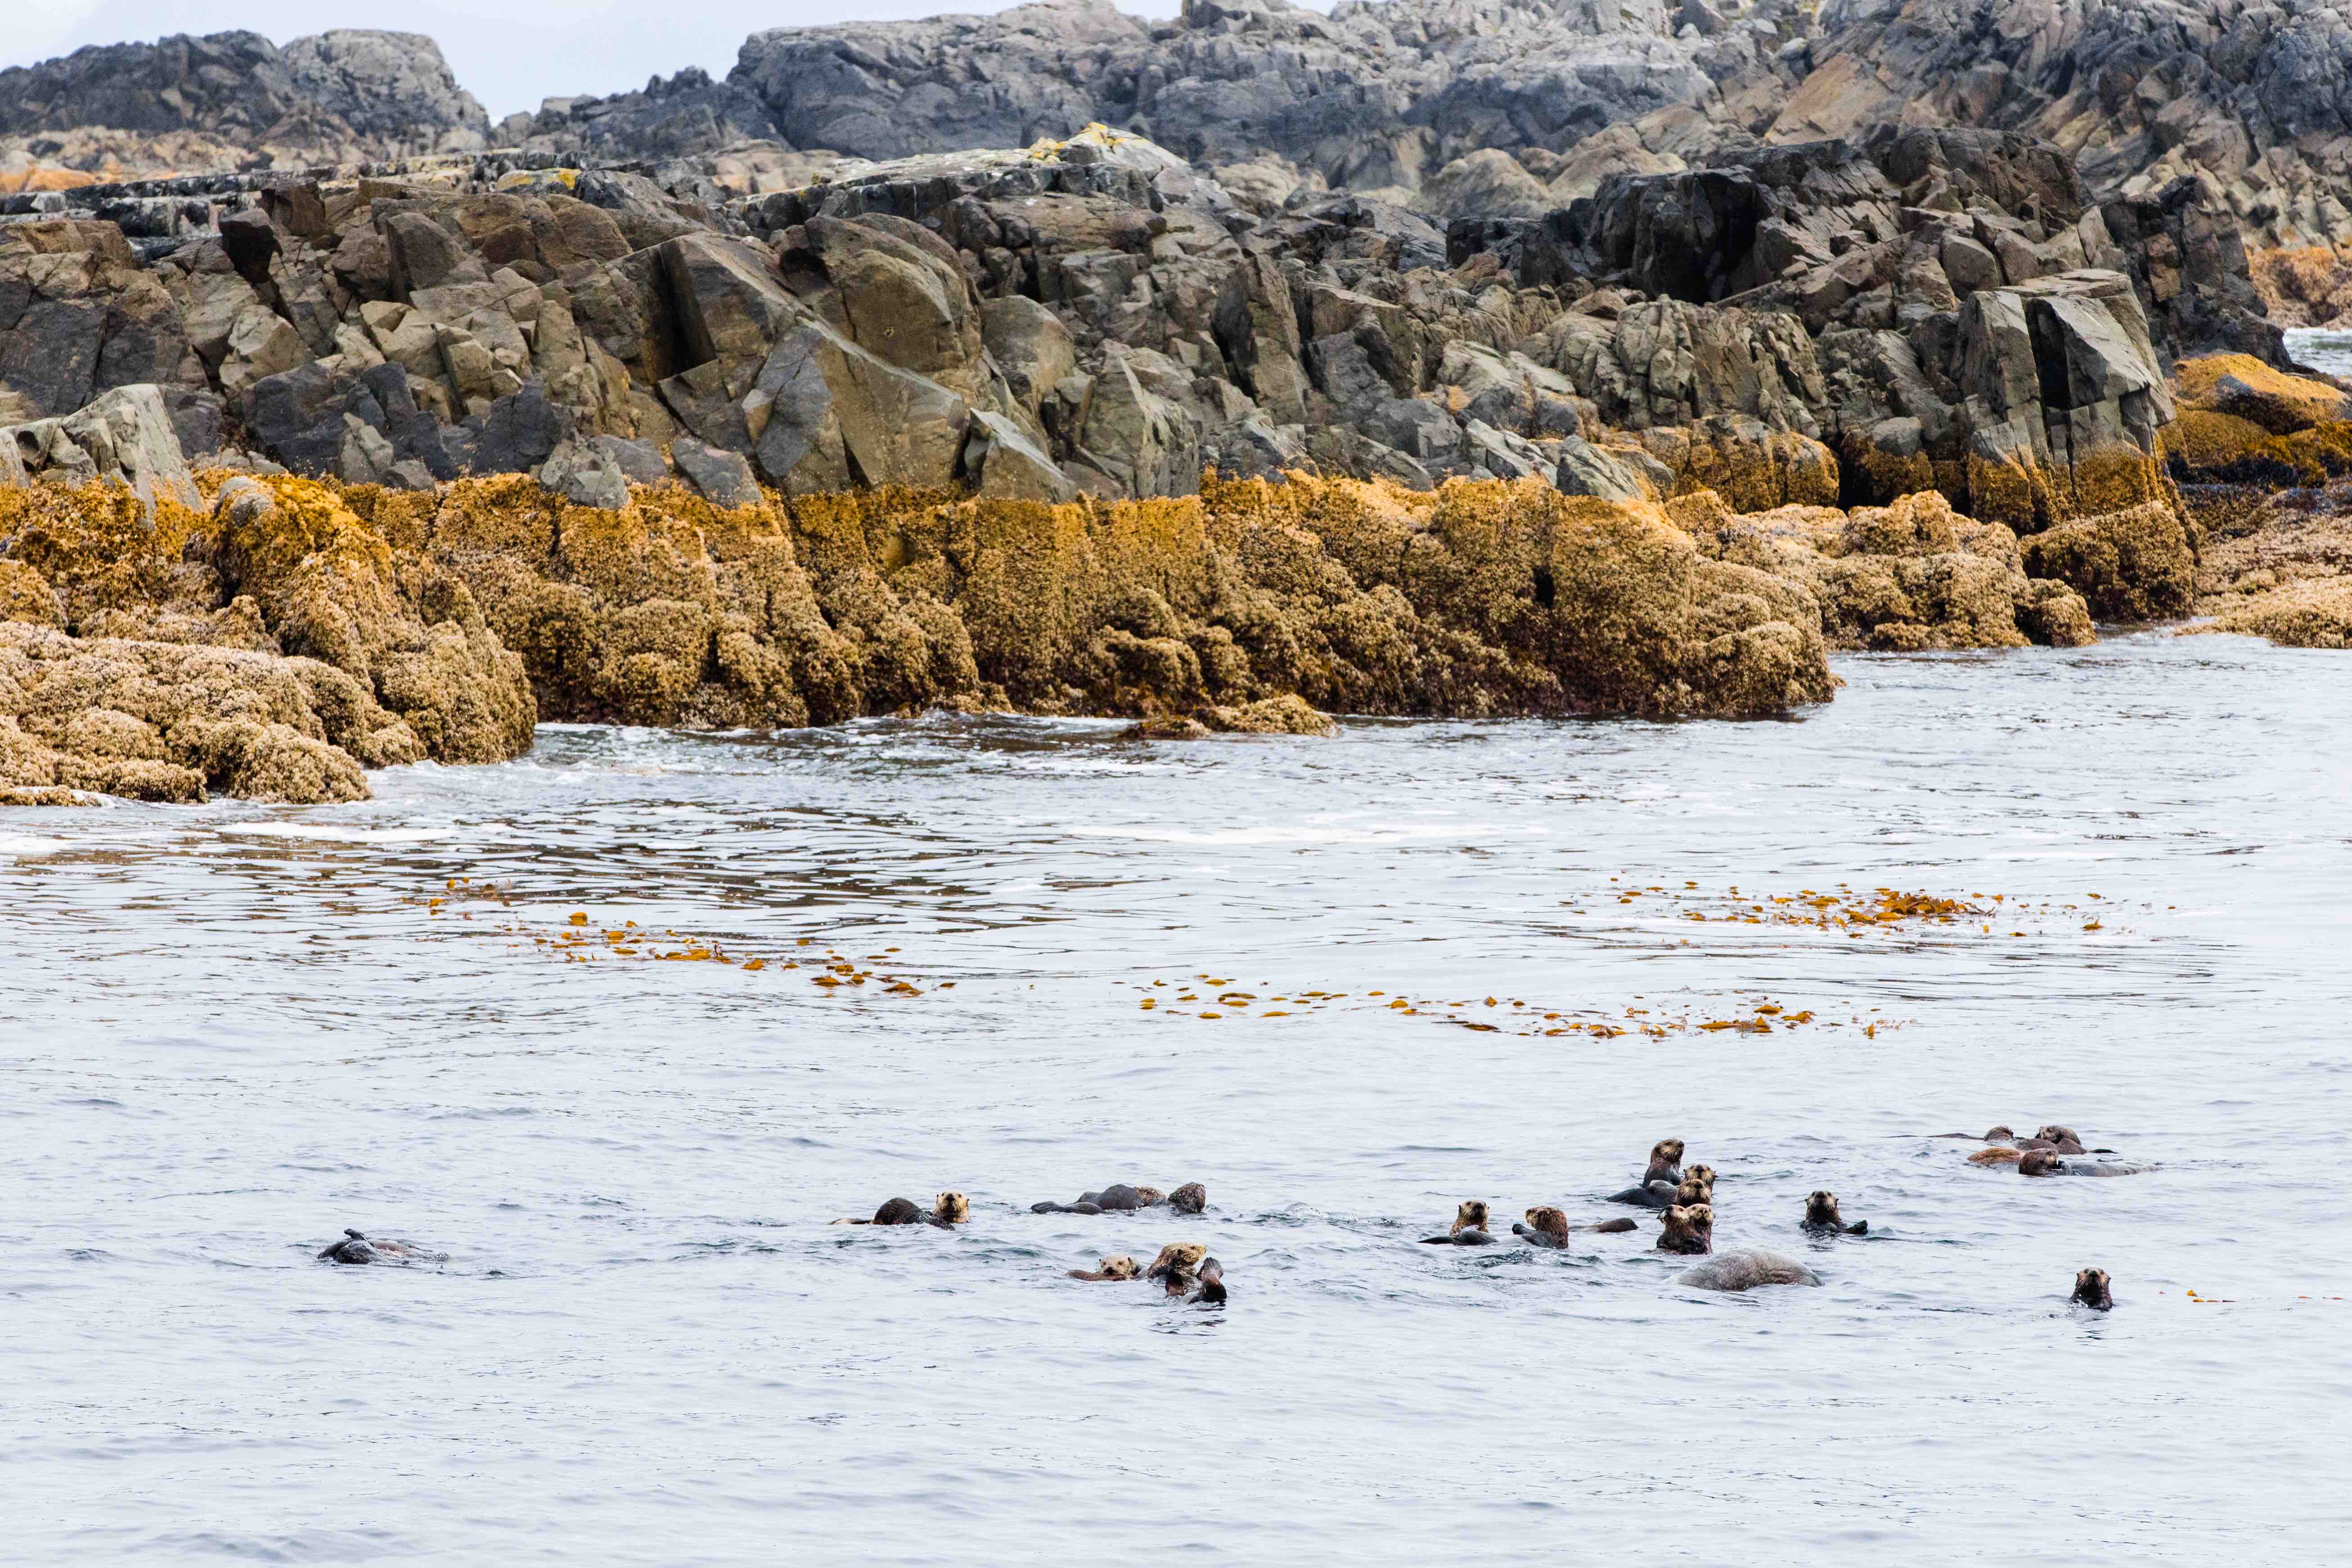 A group of playful sea otters in swimming in the ocean.